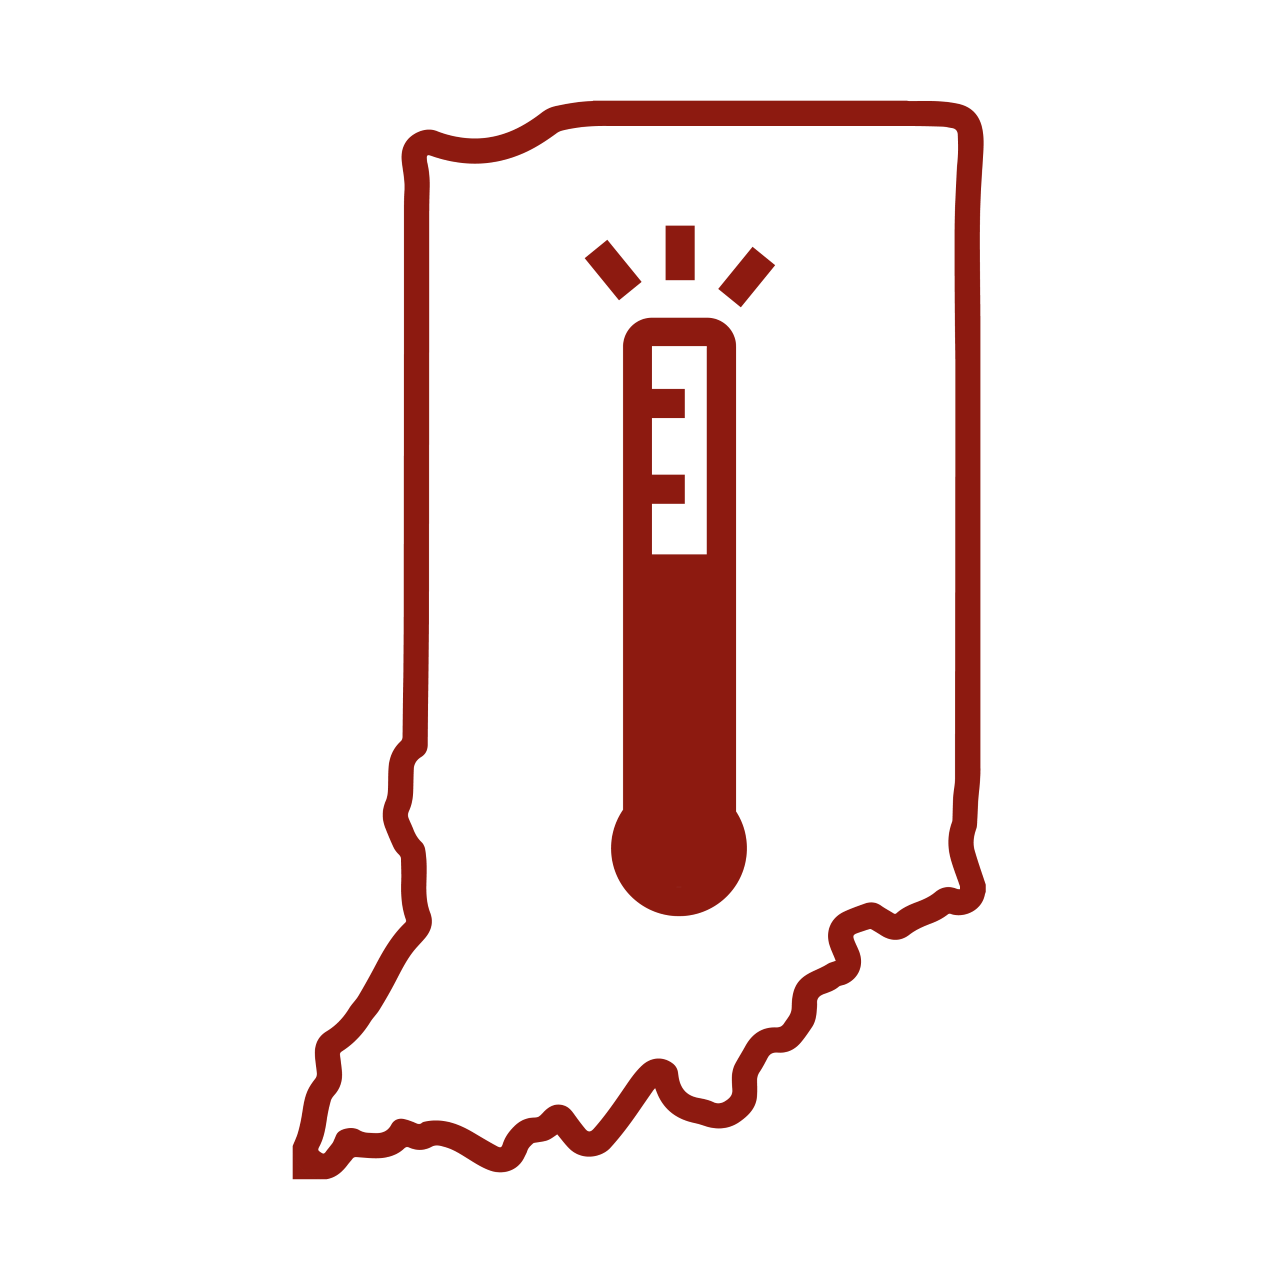 An outline of Indiana with a thermometer in the middle